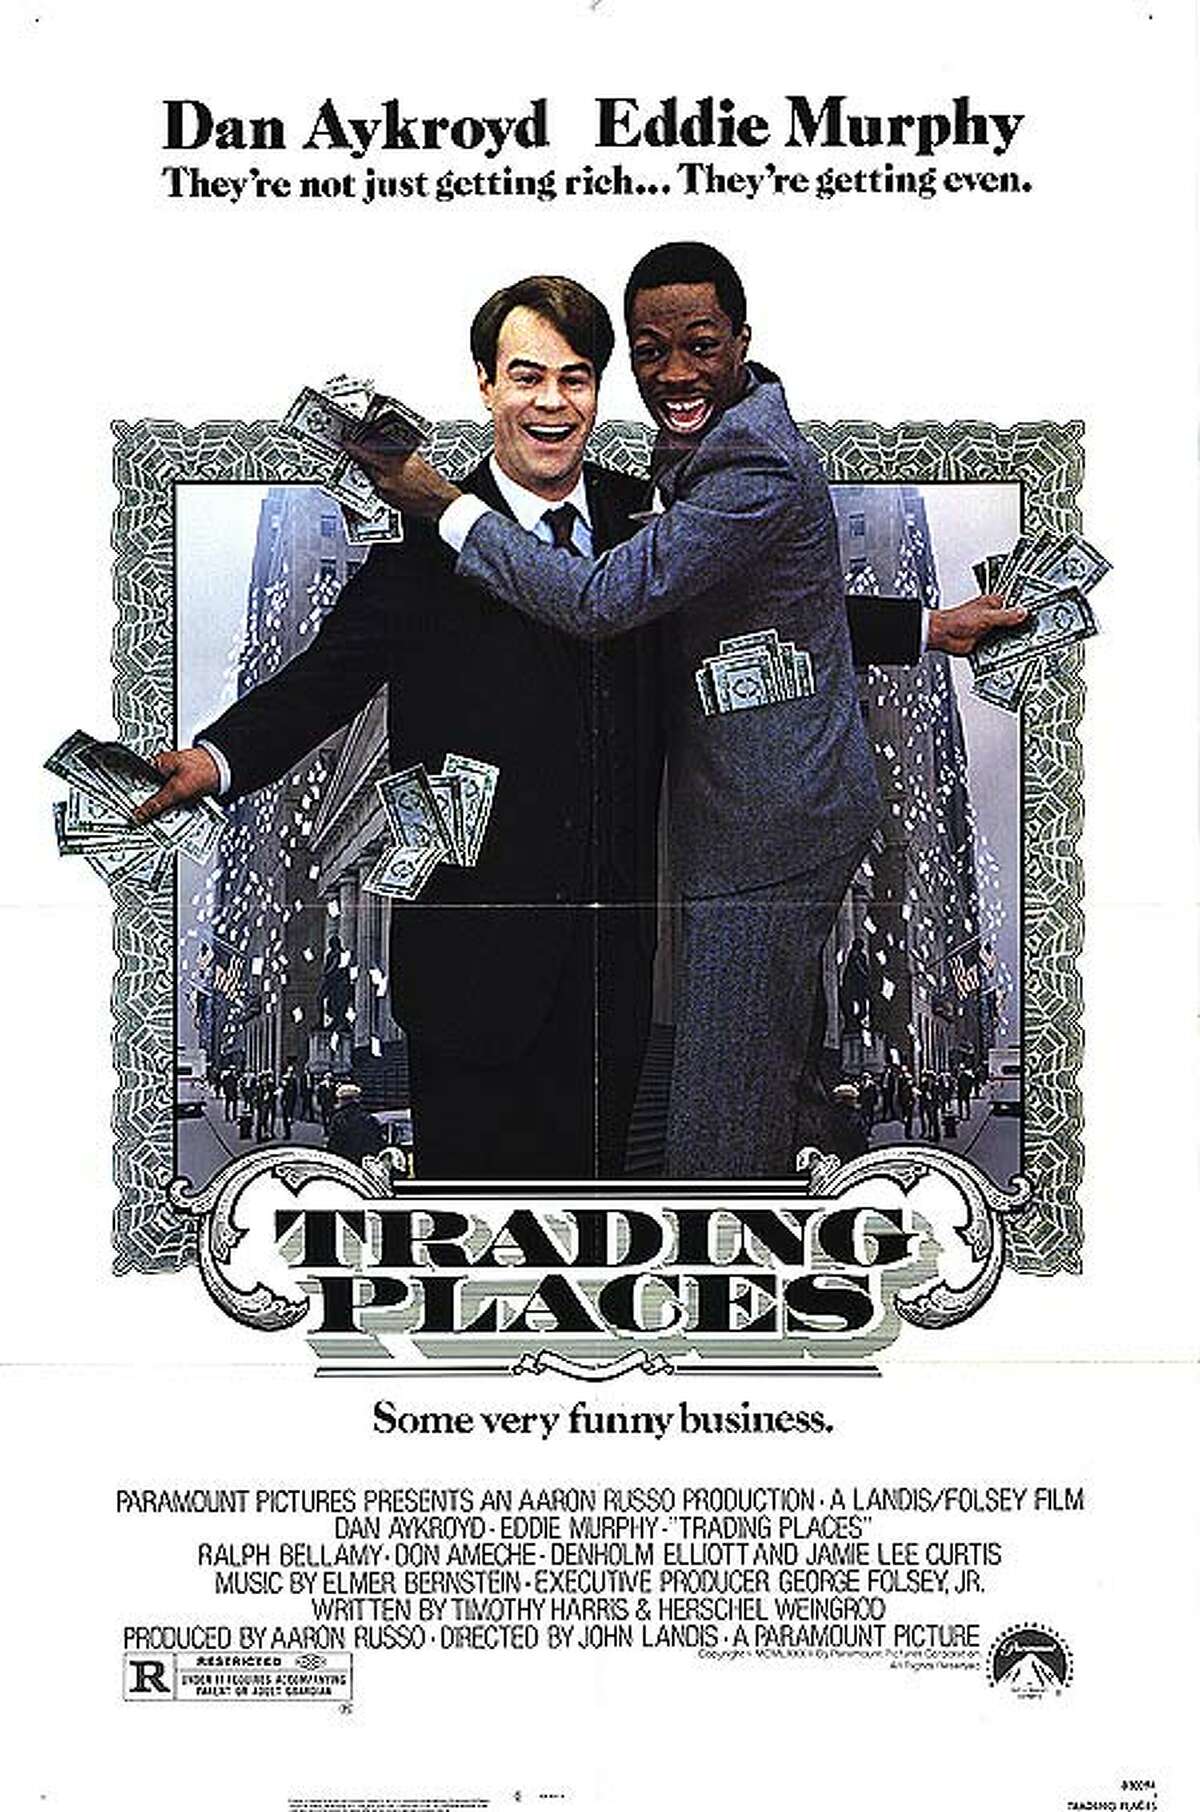 "Trading Places" is the 1983 Christmas flick that simultaneously skewered and celebrated the "greed is good" attitude of the '80s, starring comedy superstars of the time Dan Aykroyd and Eddie Murphy.